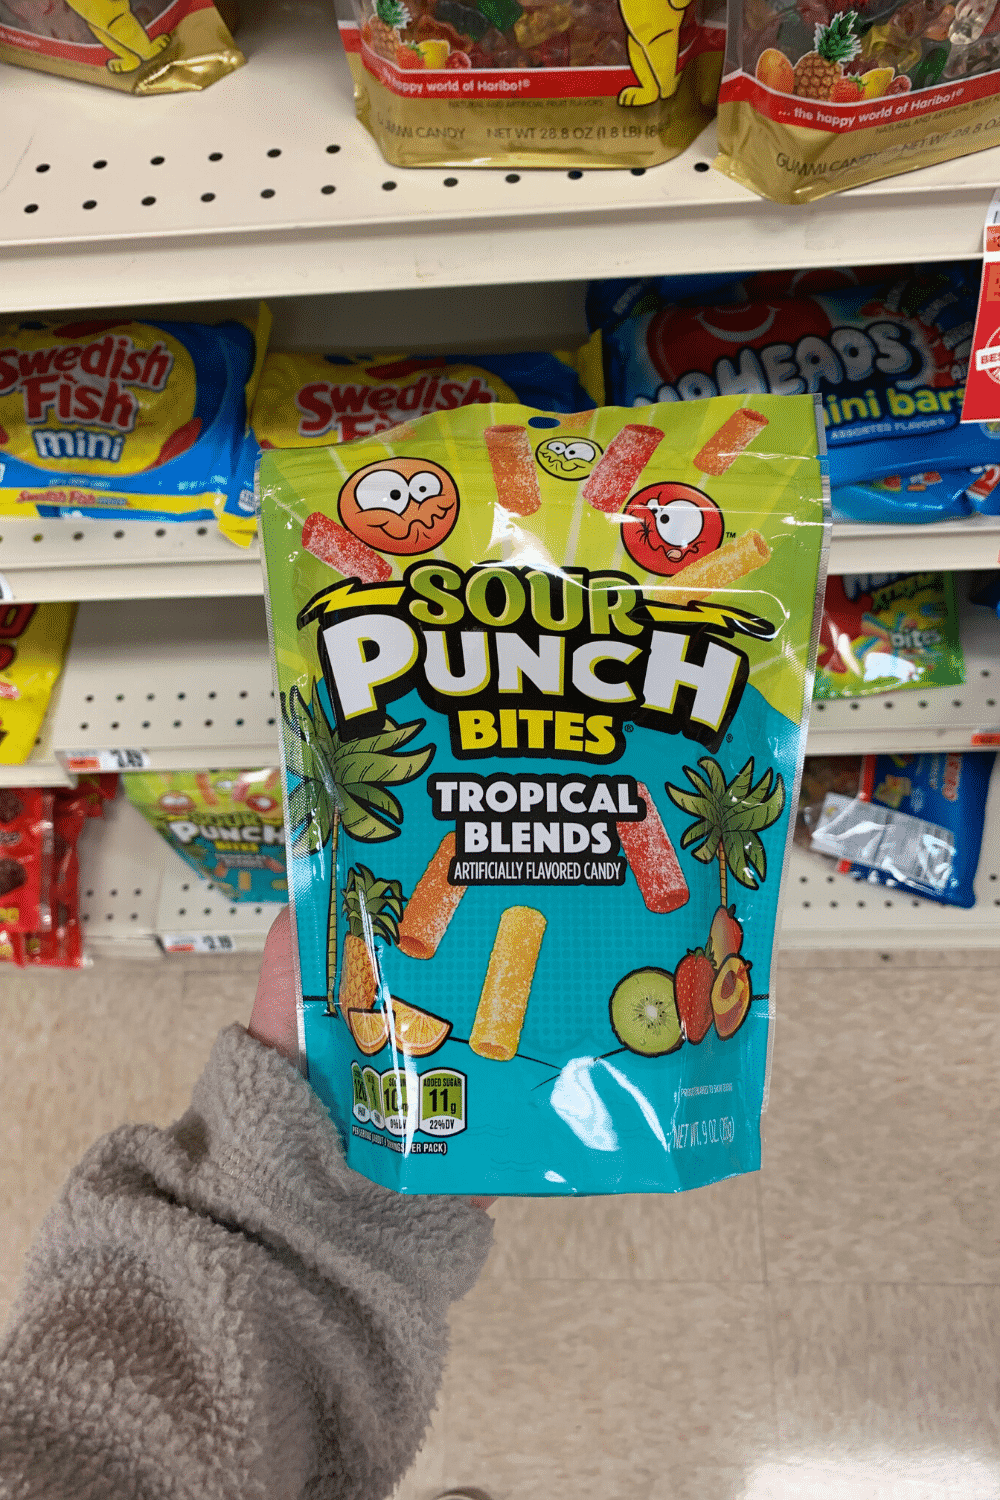 A hand holding a bag of sour Punch bites tropical blends